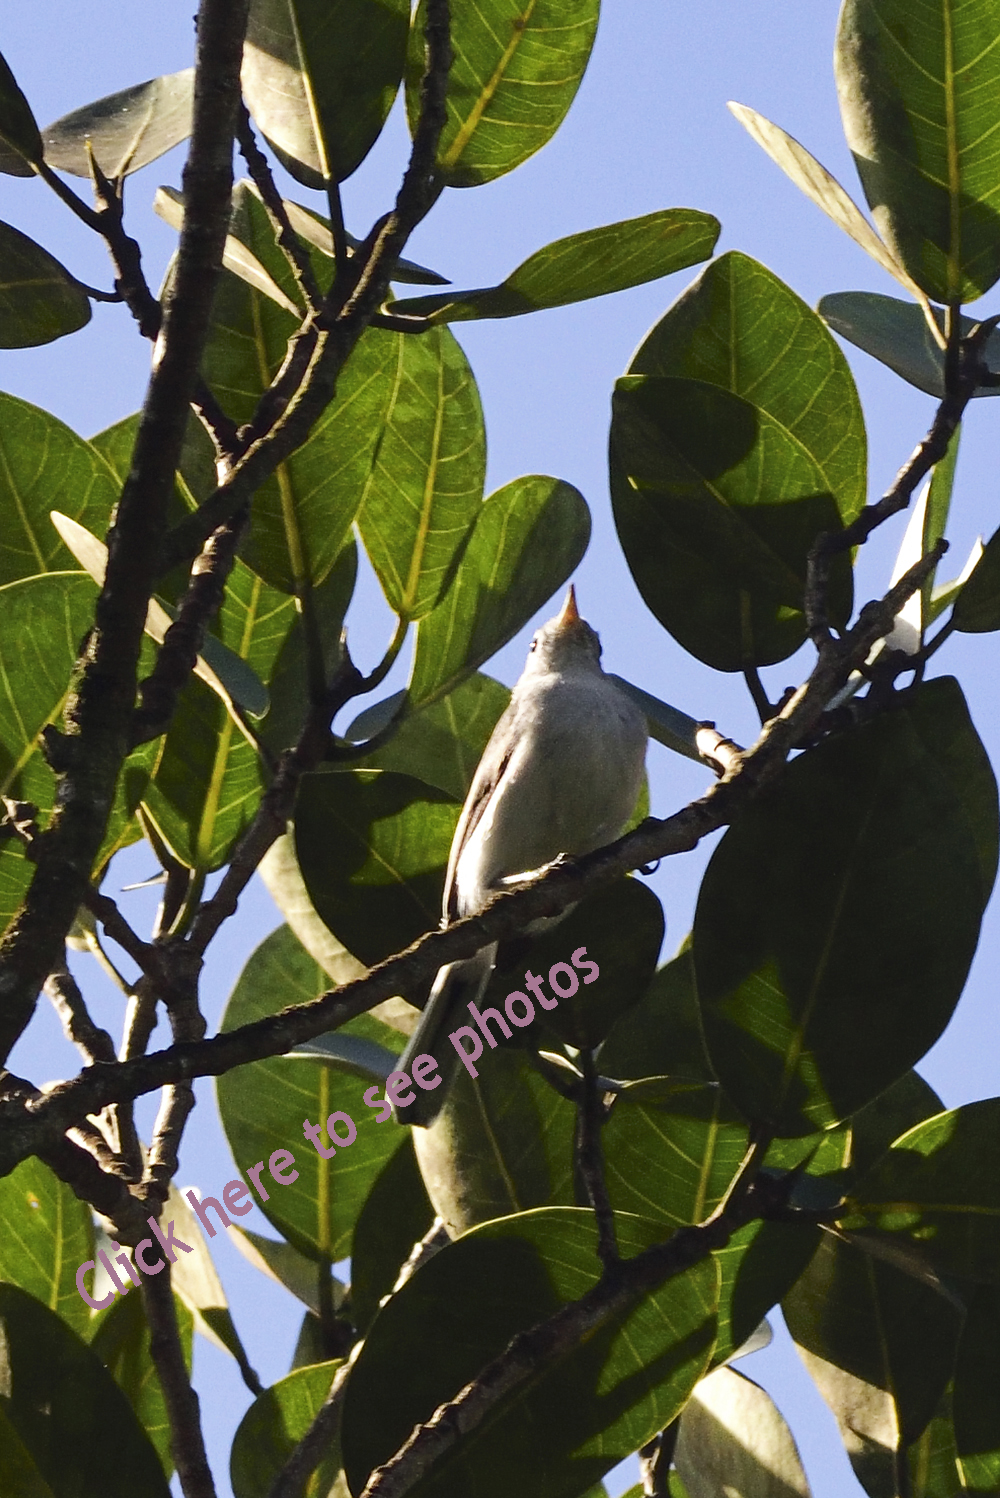 Click here to see photographs of Gnatcatchers